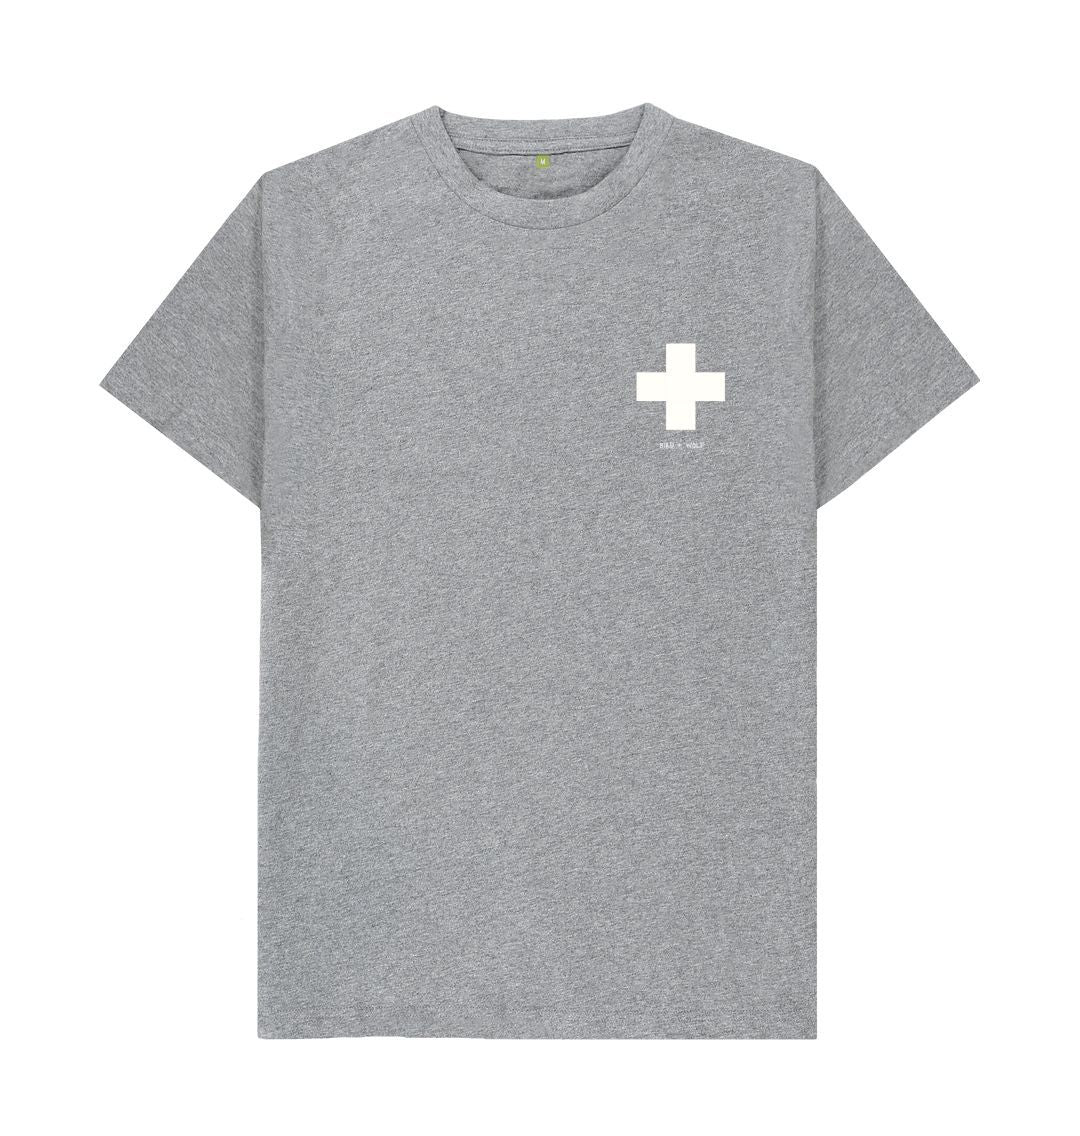 Athletic Grey Small White Cross Classic T Shirt